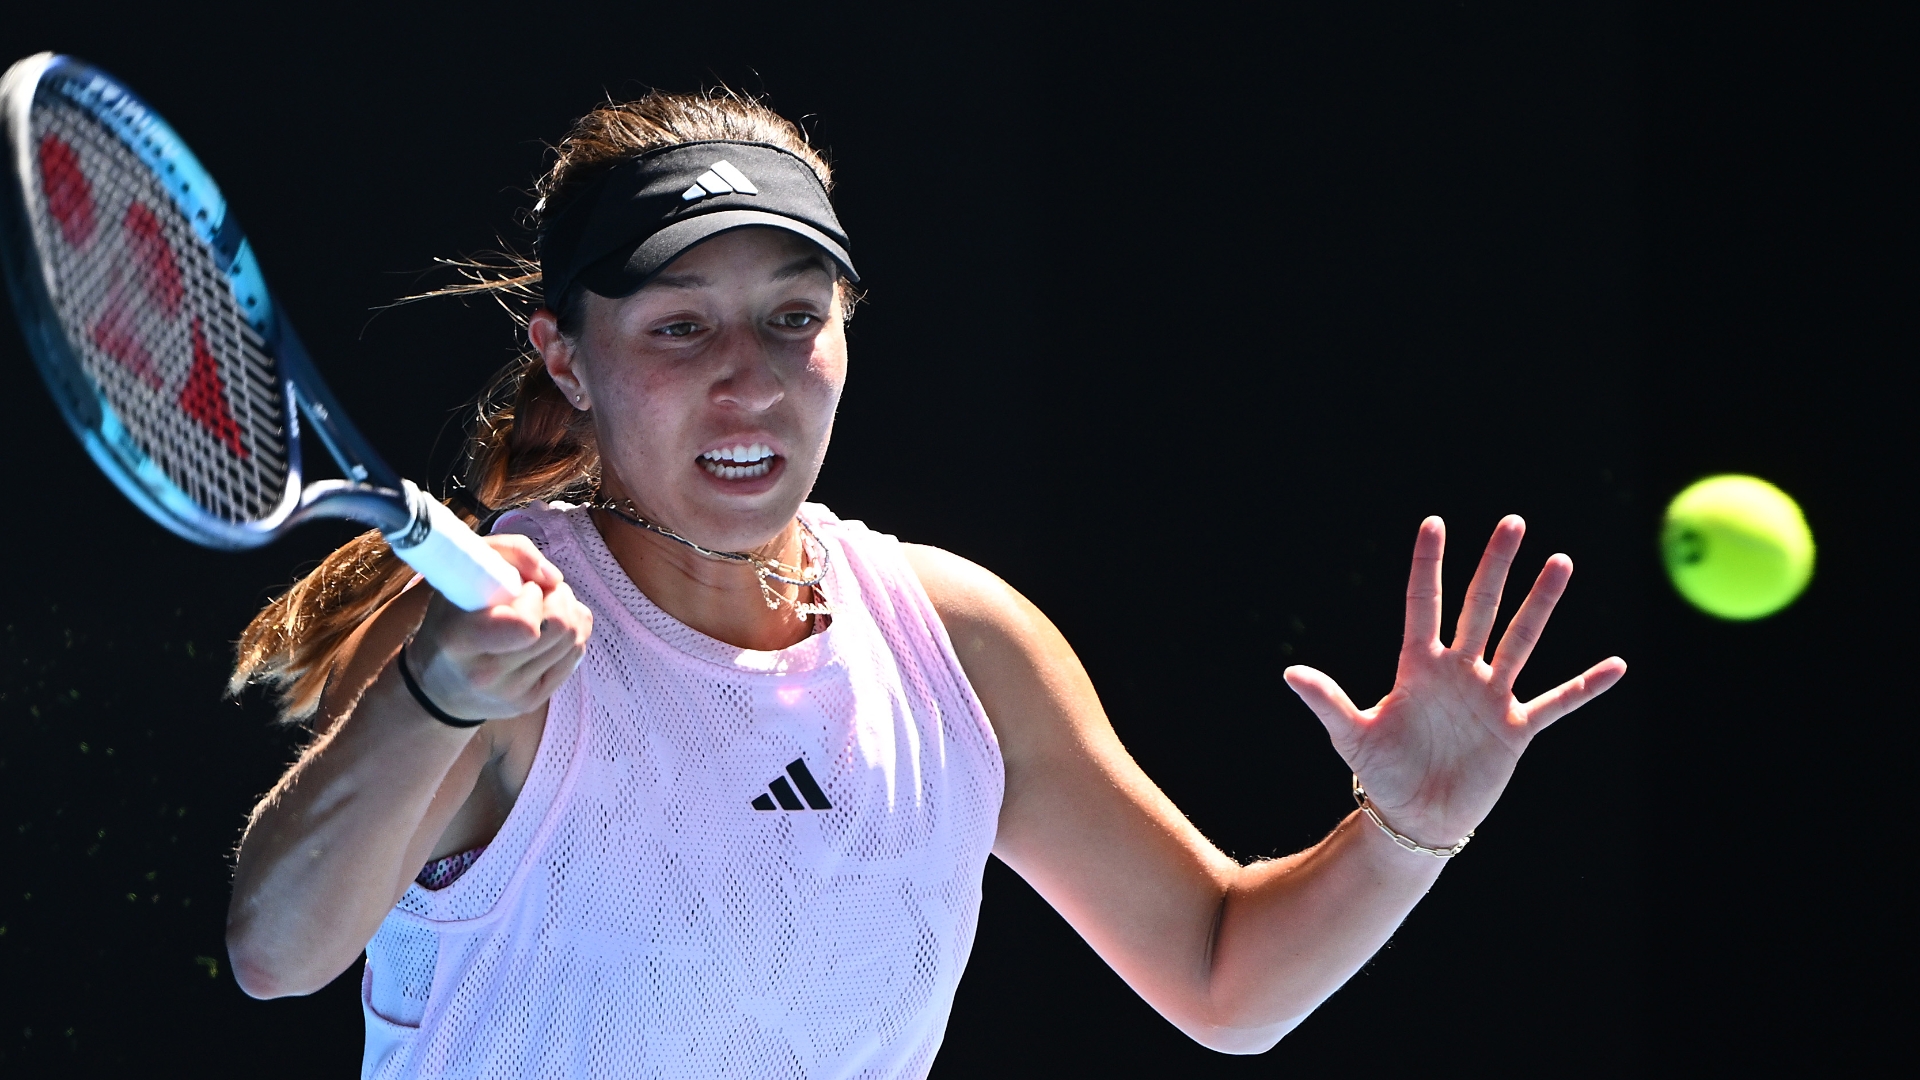 Pegula cruises into the fourth round at the Aussie Open - Stream the Video 